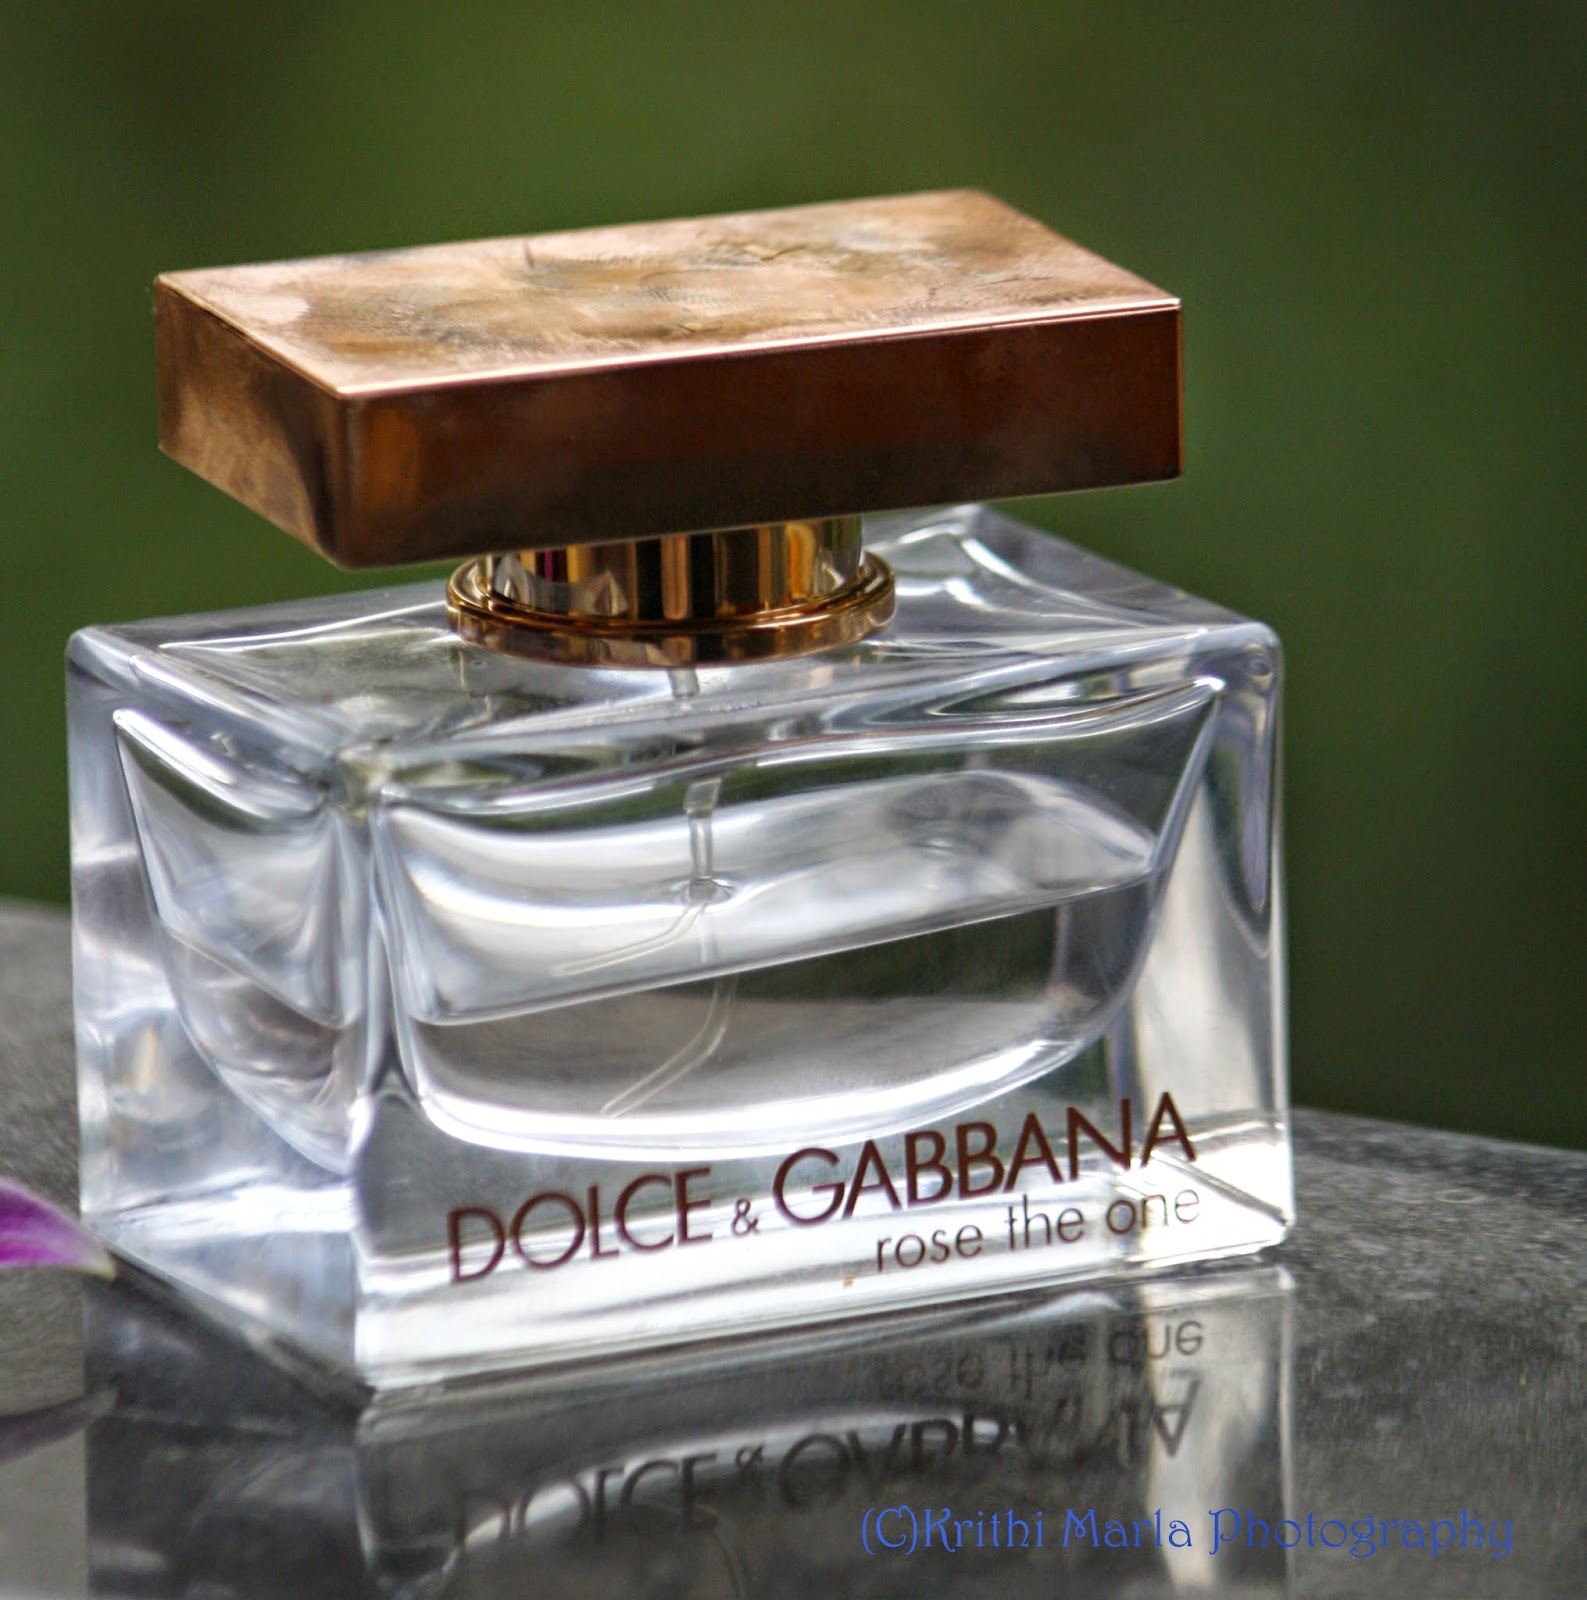 dolce and gabbana rose the one review